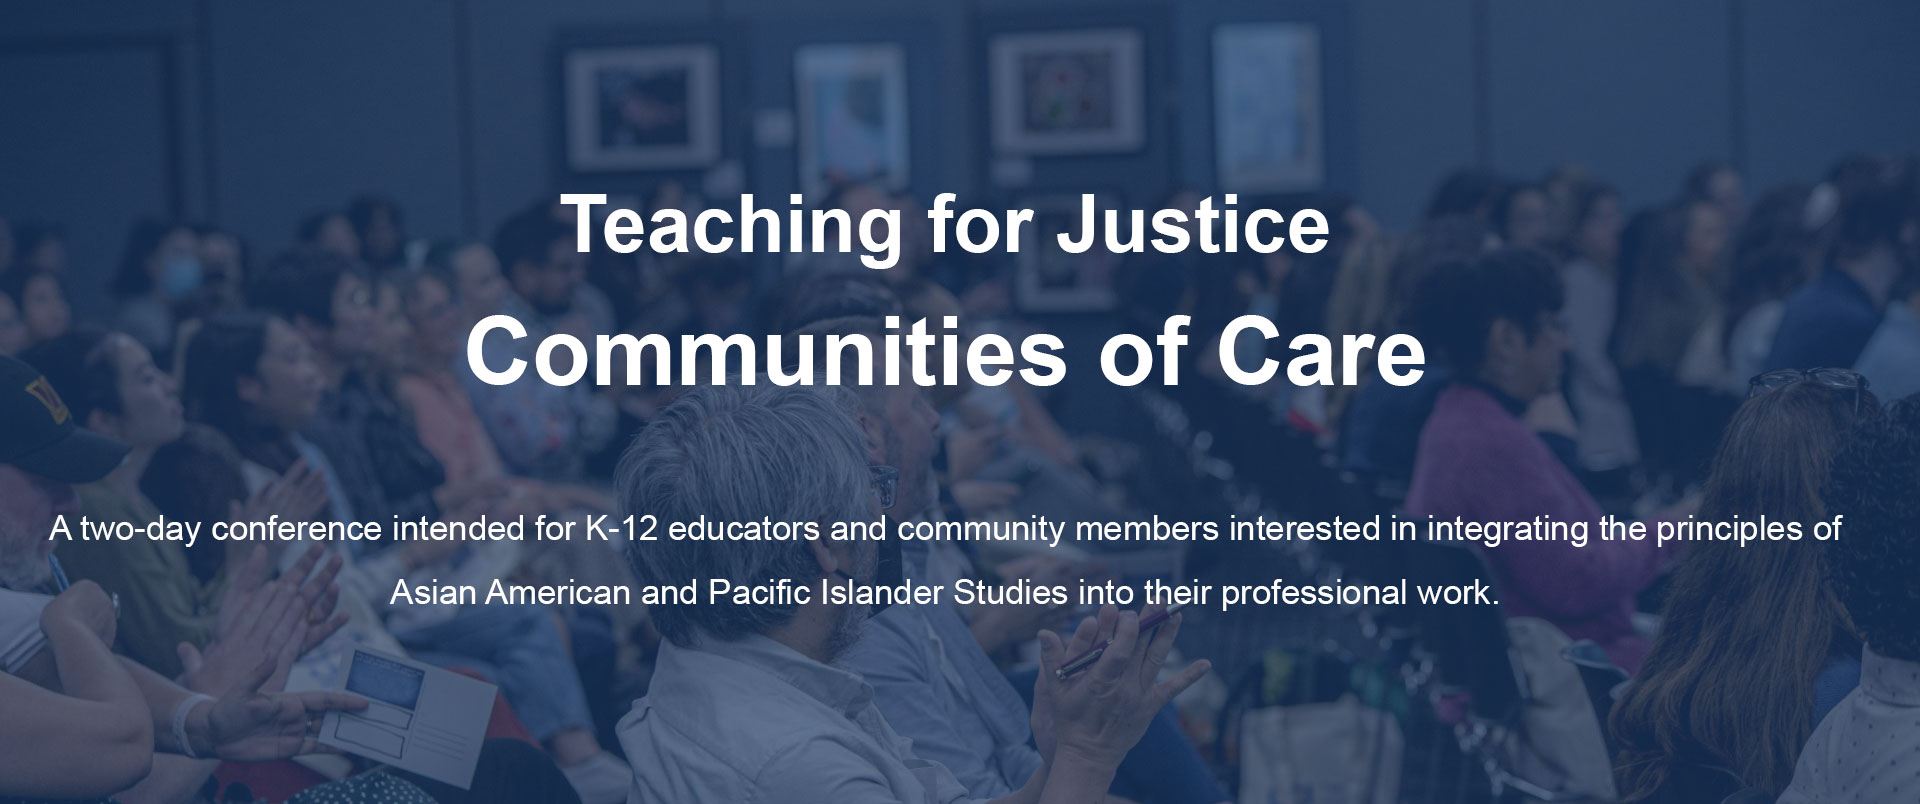 Teaching for Justice - Communities of Care. Visit the Teaching for Justice website by clicking on image.